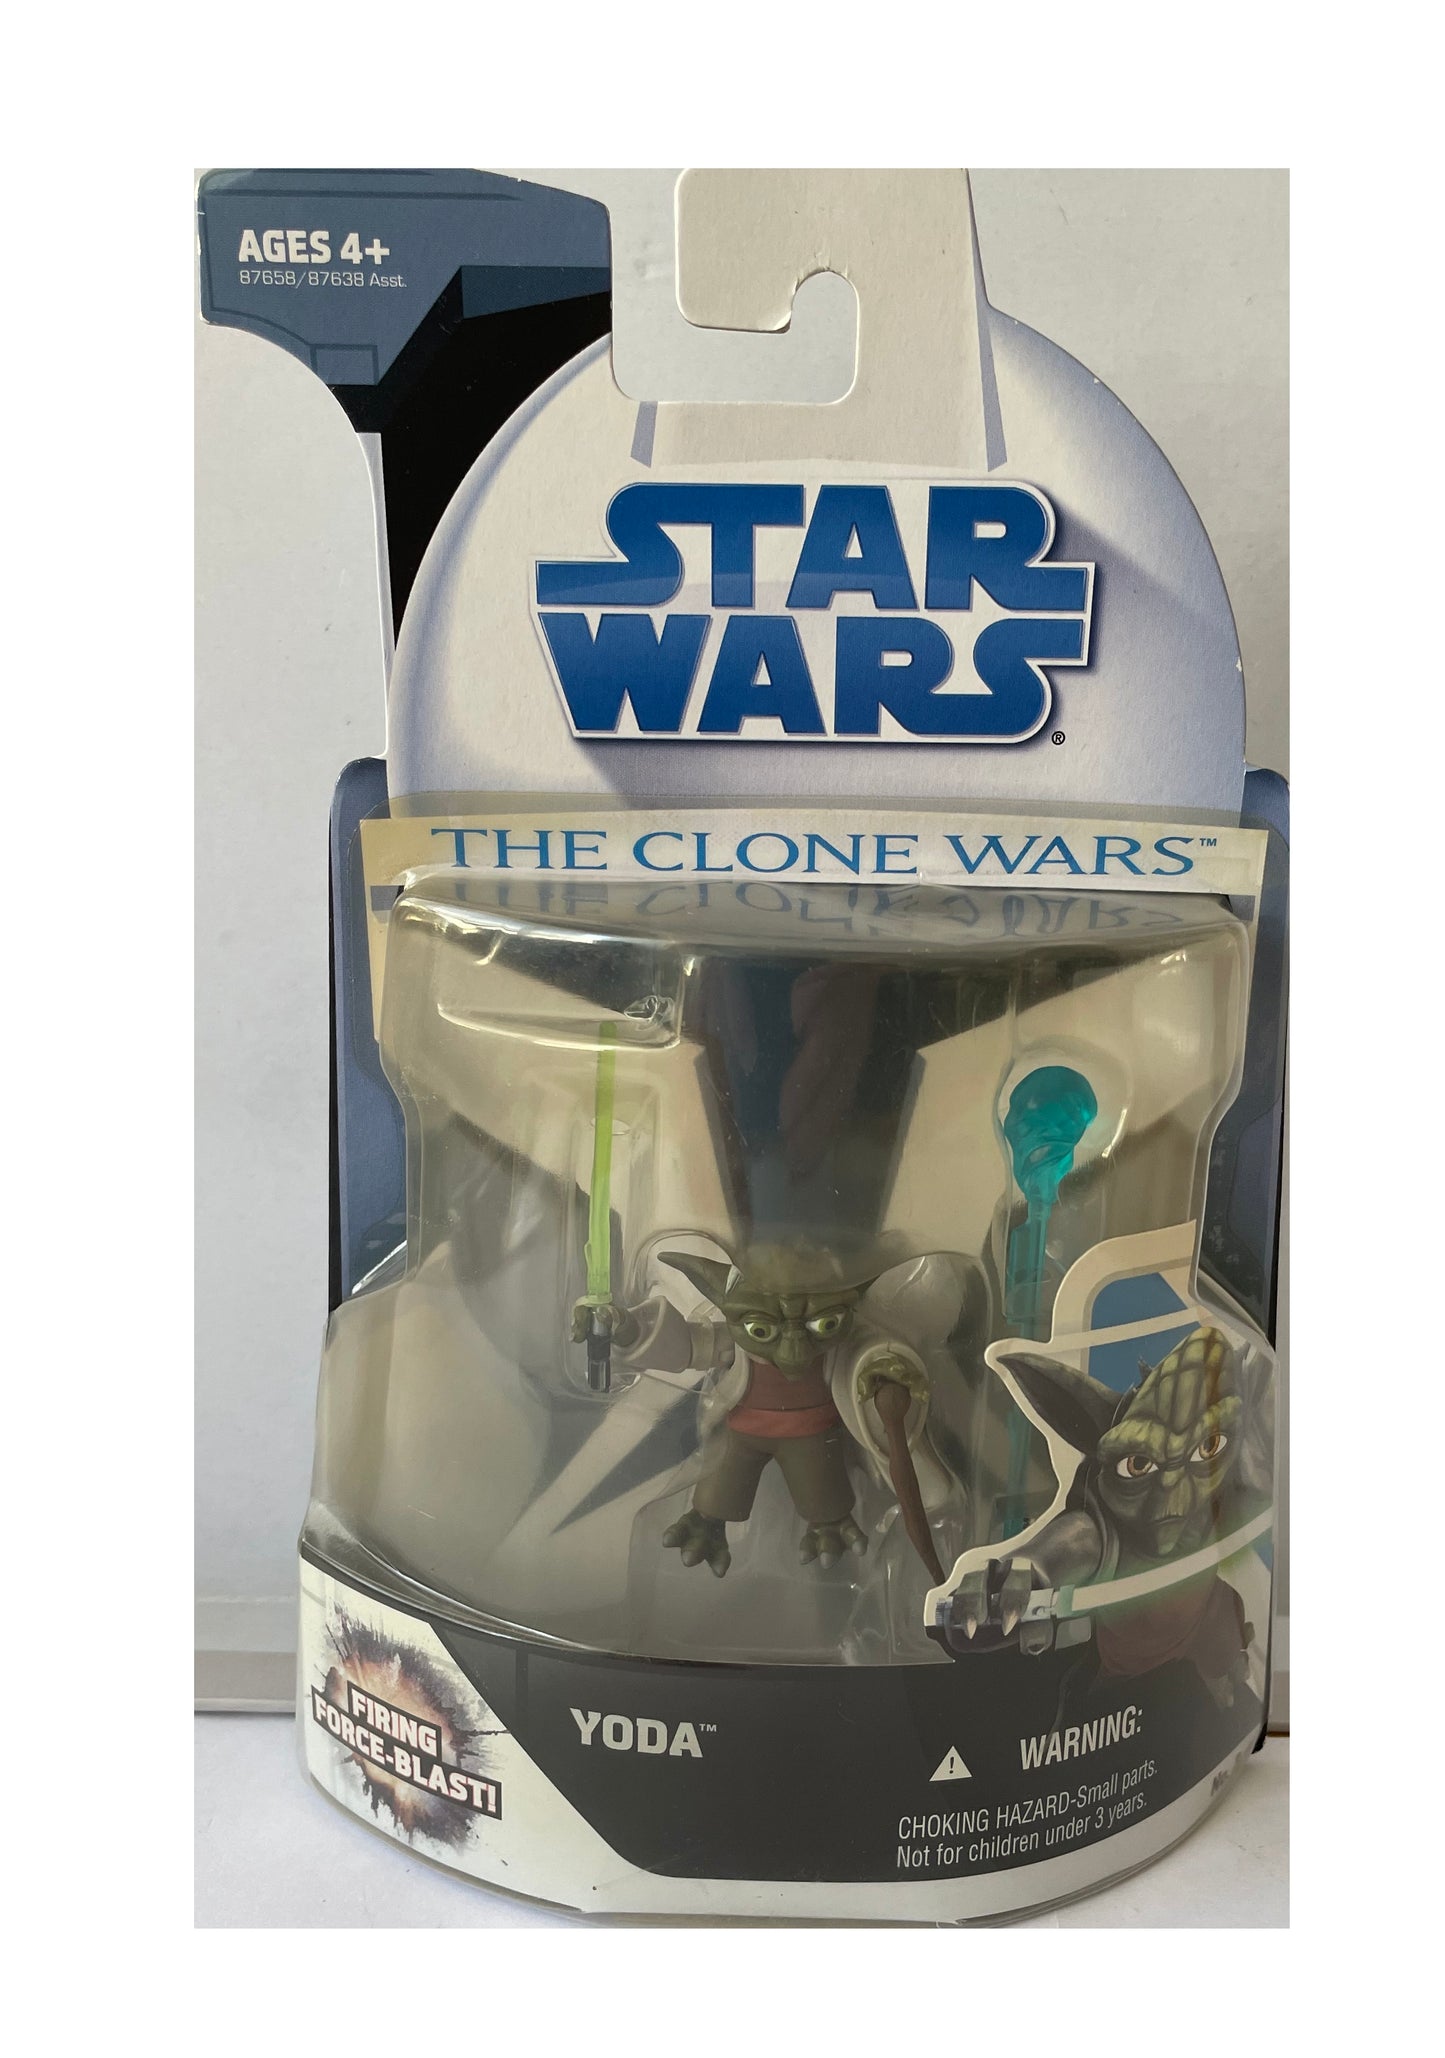 Vintage 2008 Star Wars The Clone Wars Jedi Master Yoda Action Figure With Firing Force Blast Action - Factory Sealed Shop Stock Room Find.